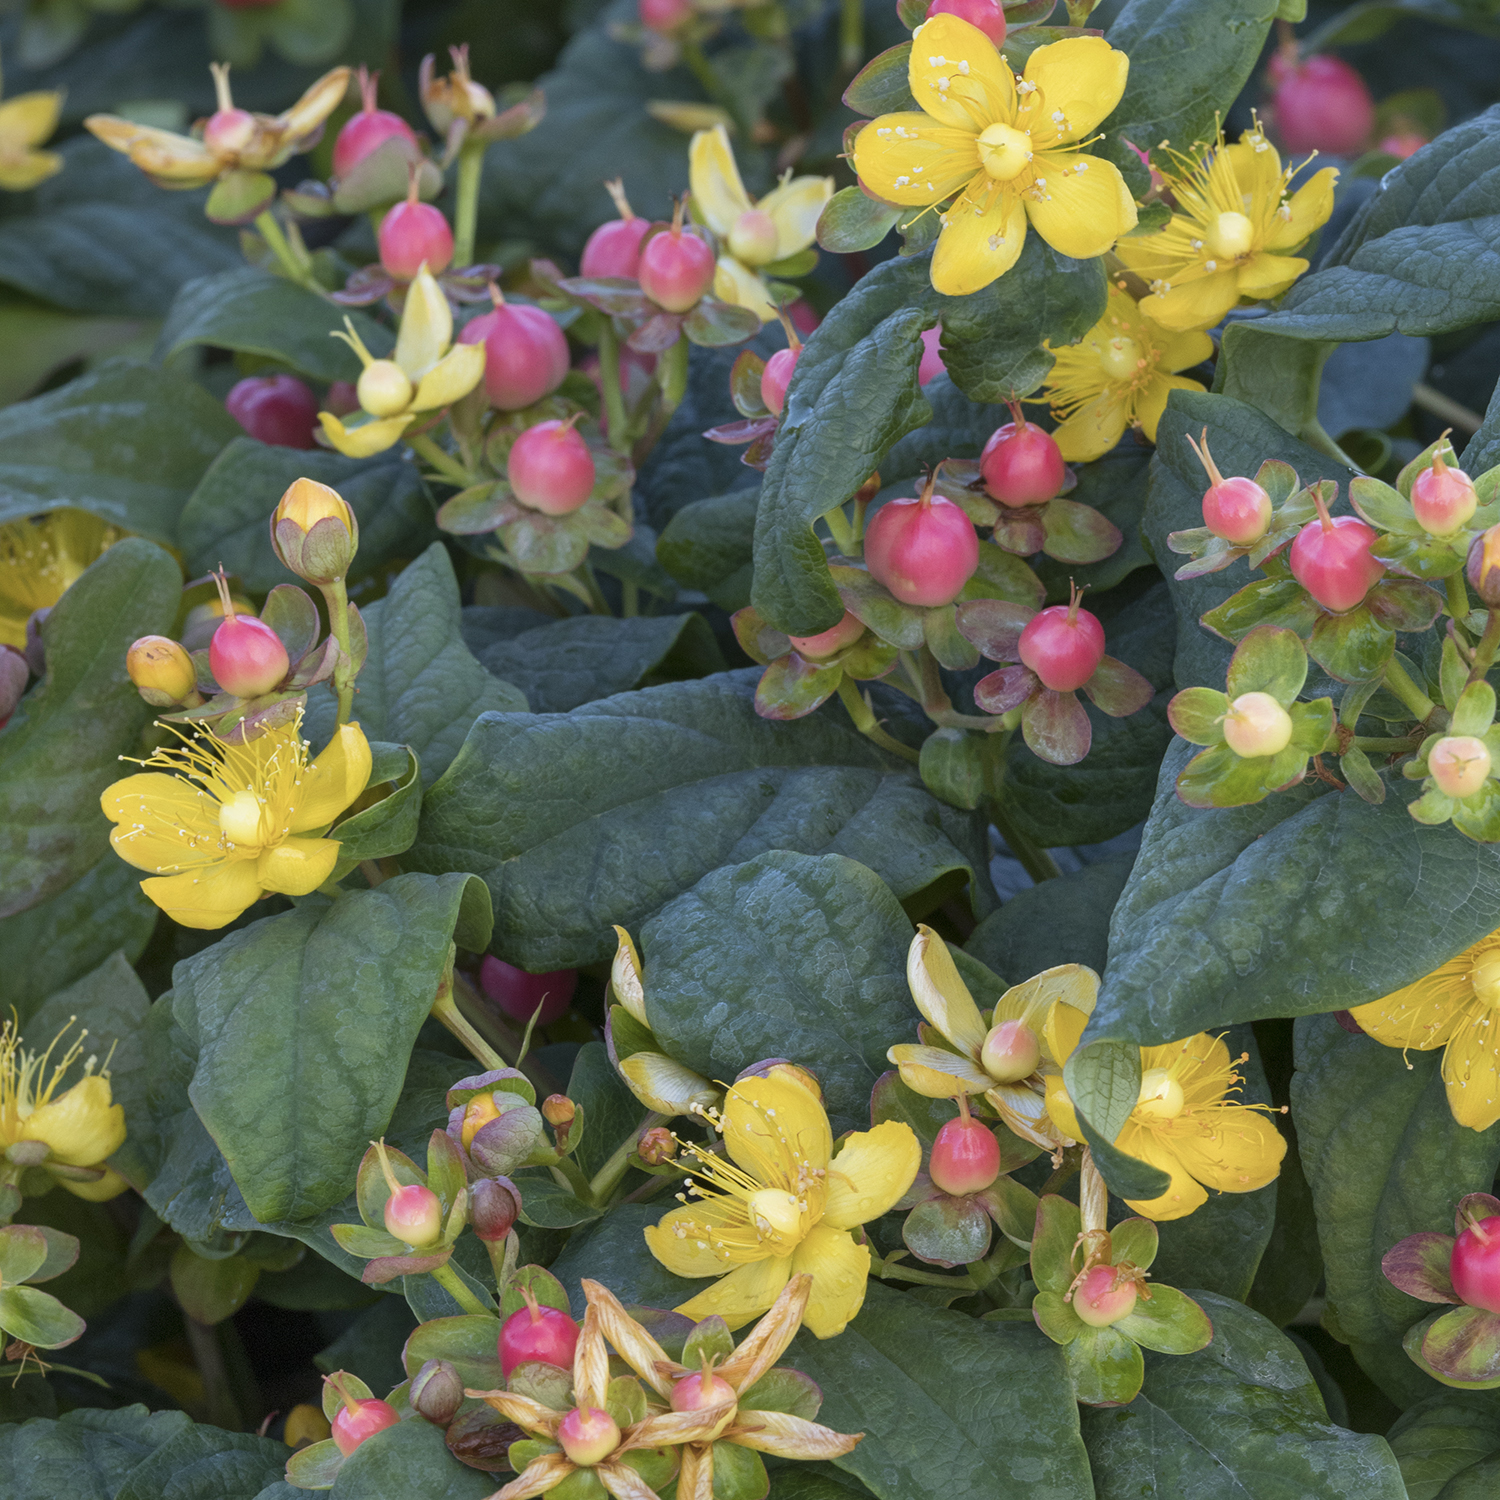 yellow flowers and pink berries on floralberry st johns wort